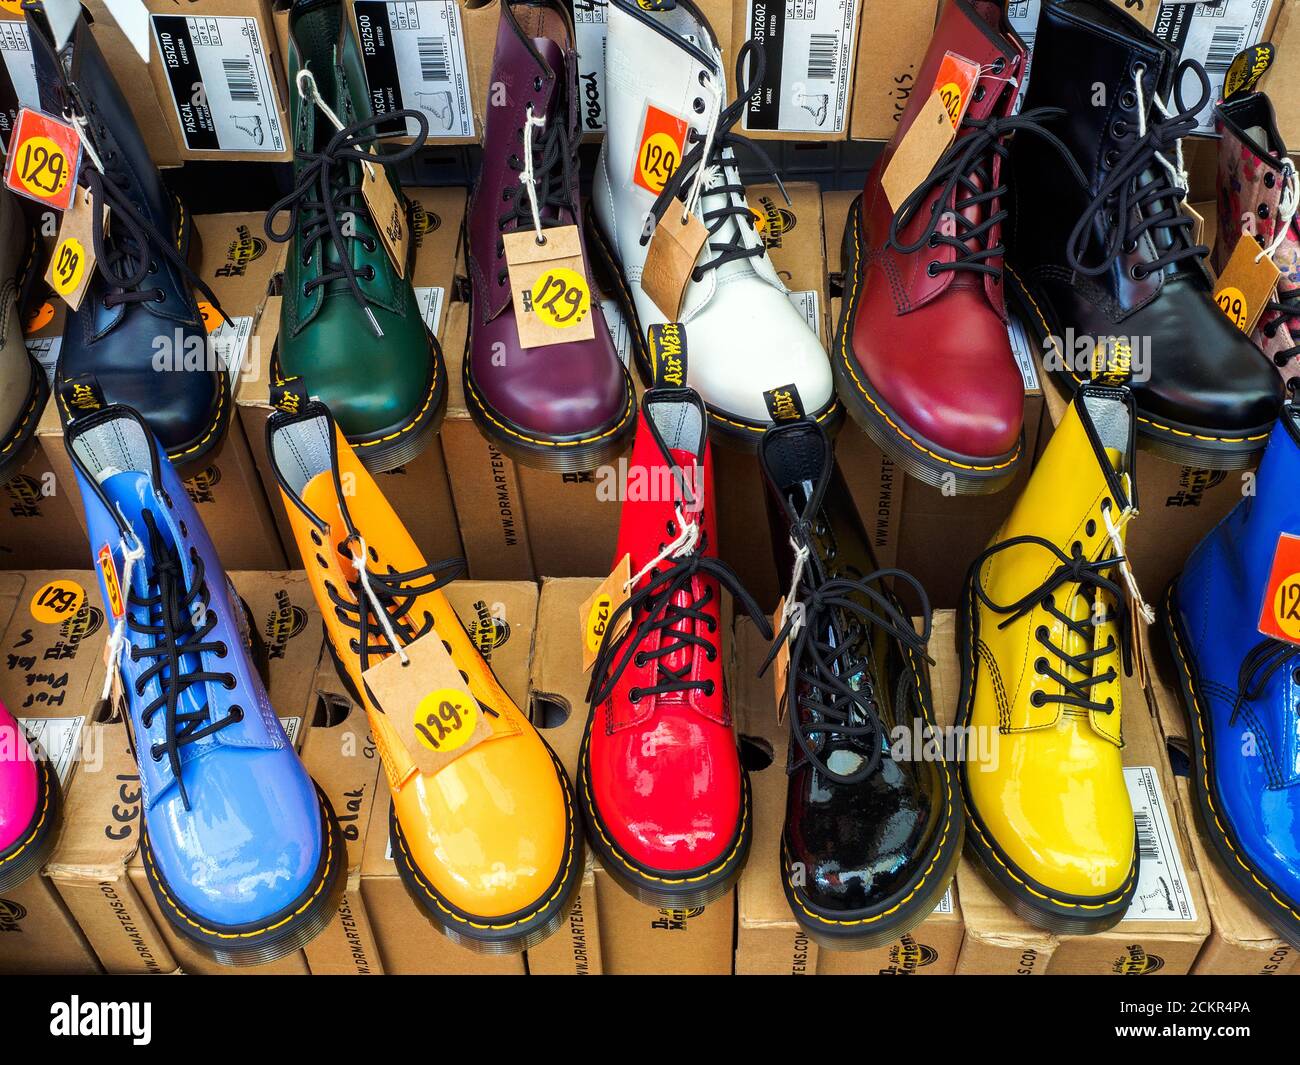 Page 3 - Dr Martens High Resolution Stock Photography and Images - Alamy